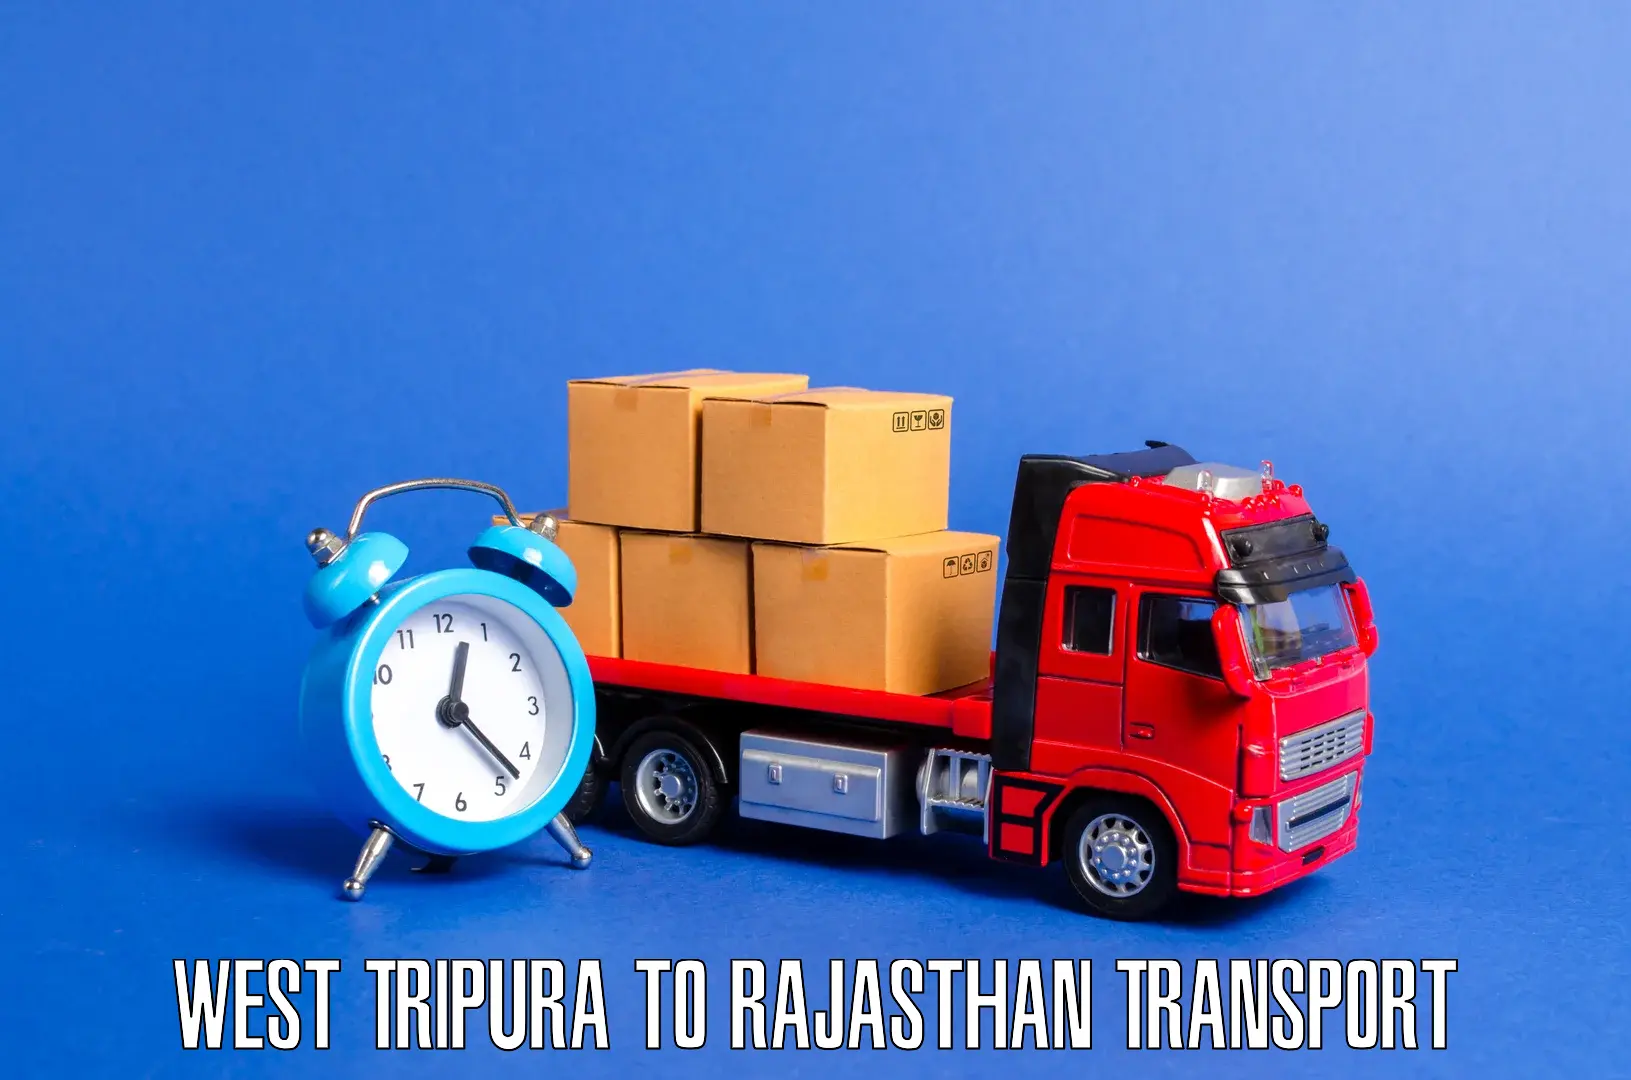 Air freight transport services West Tripura to Degana